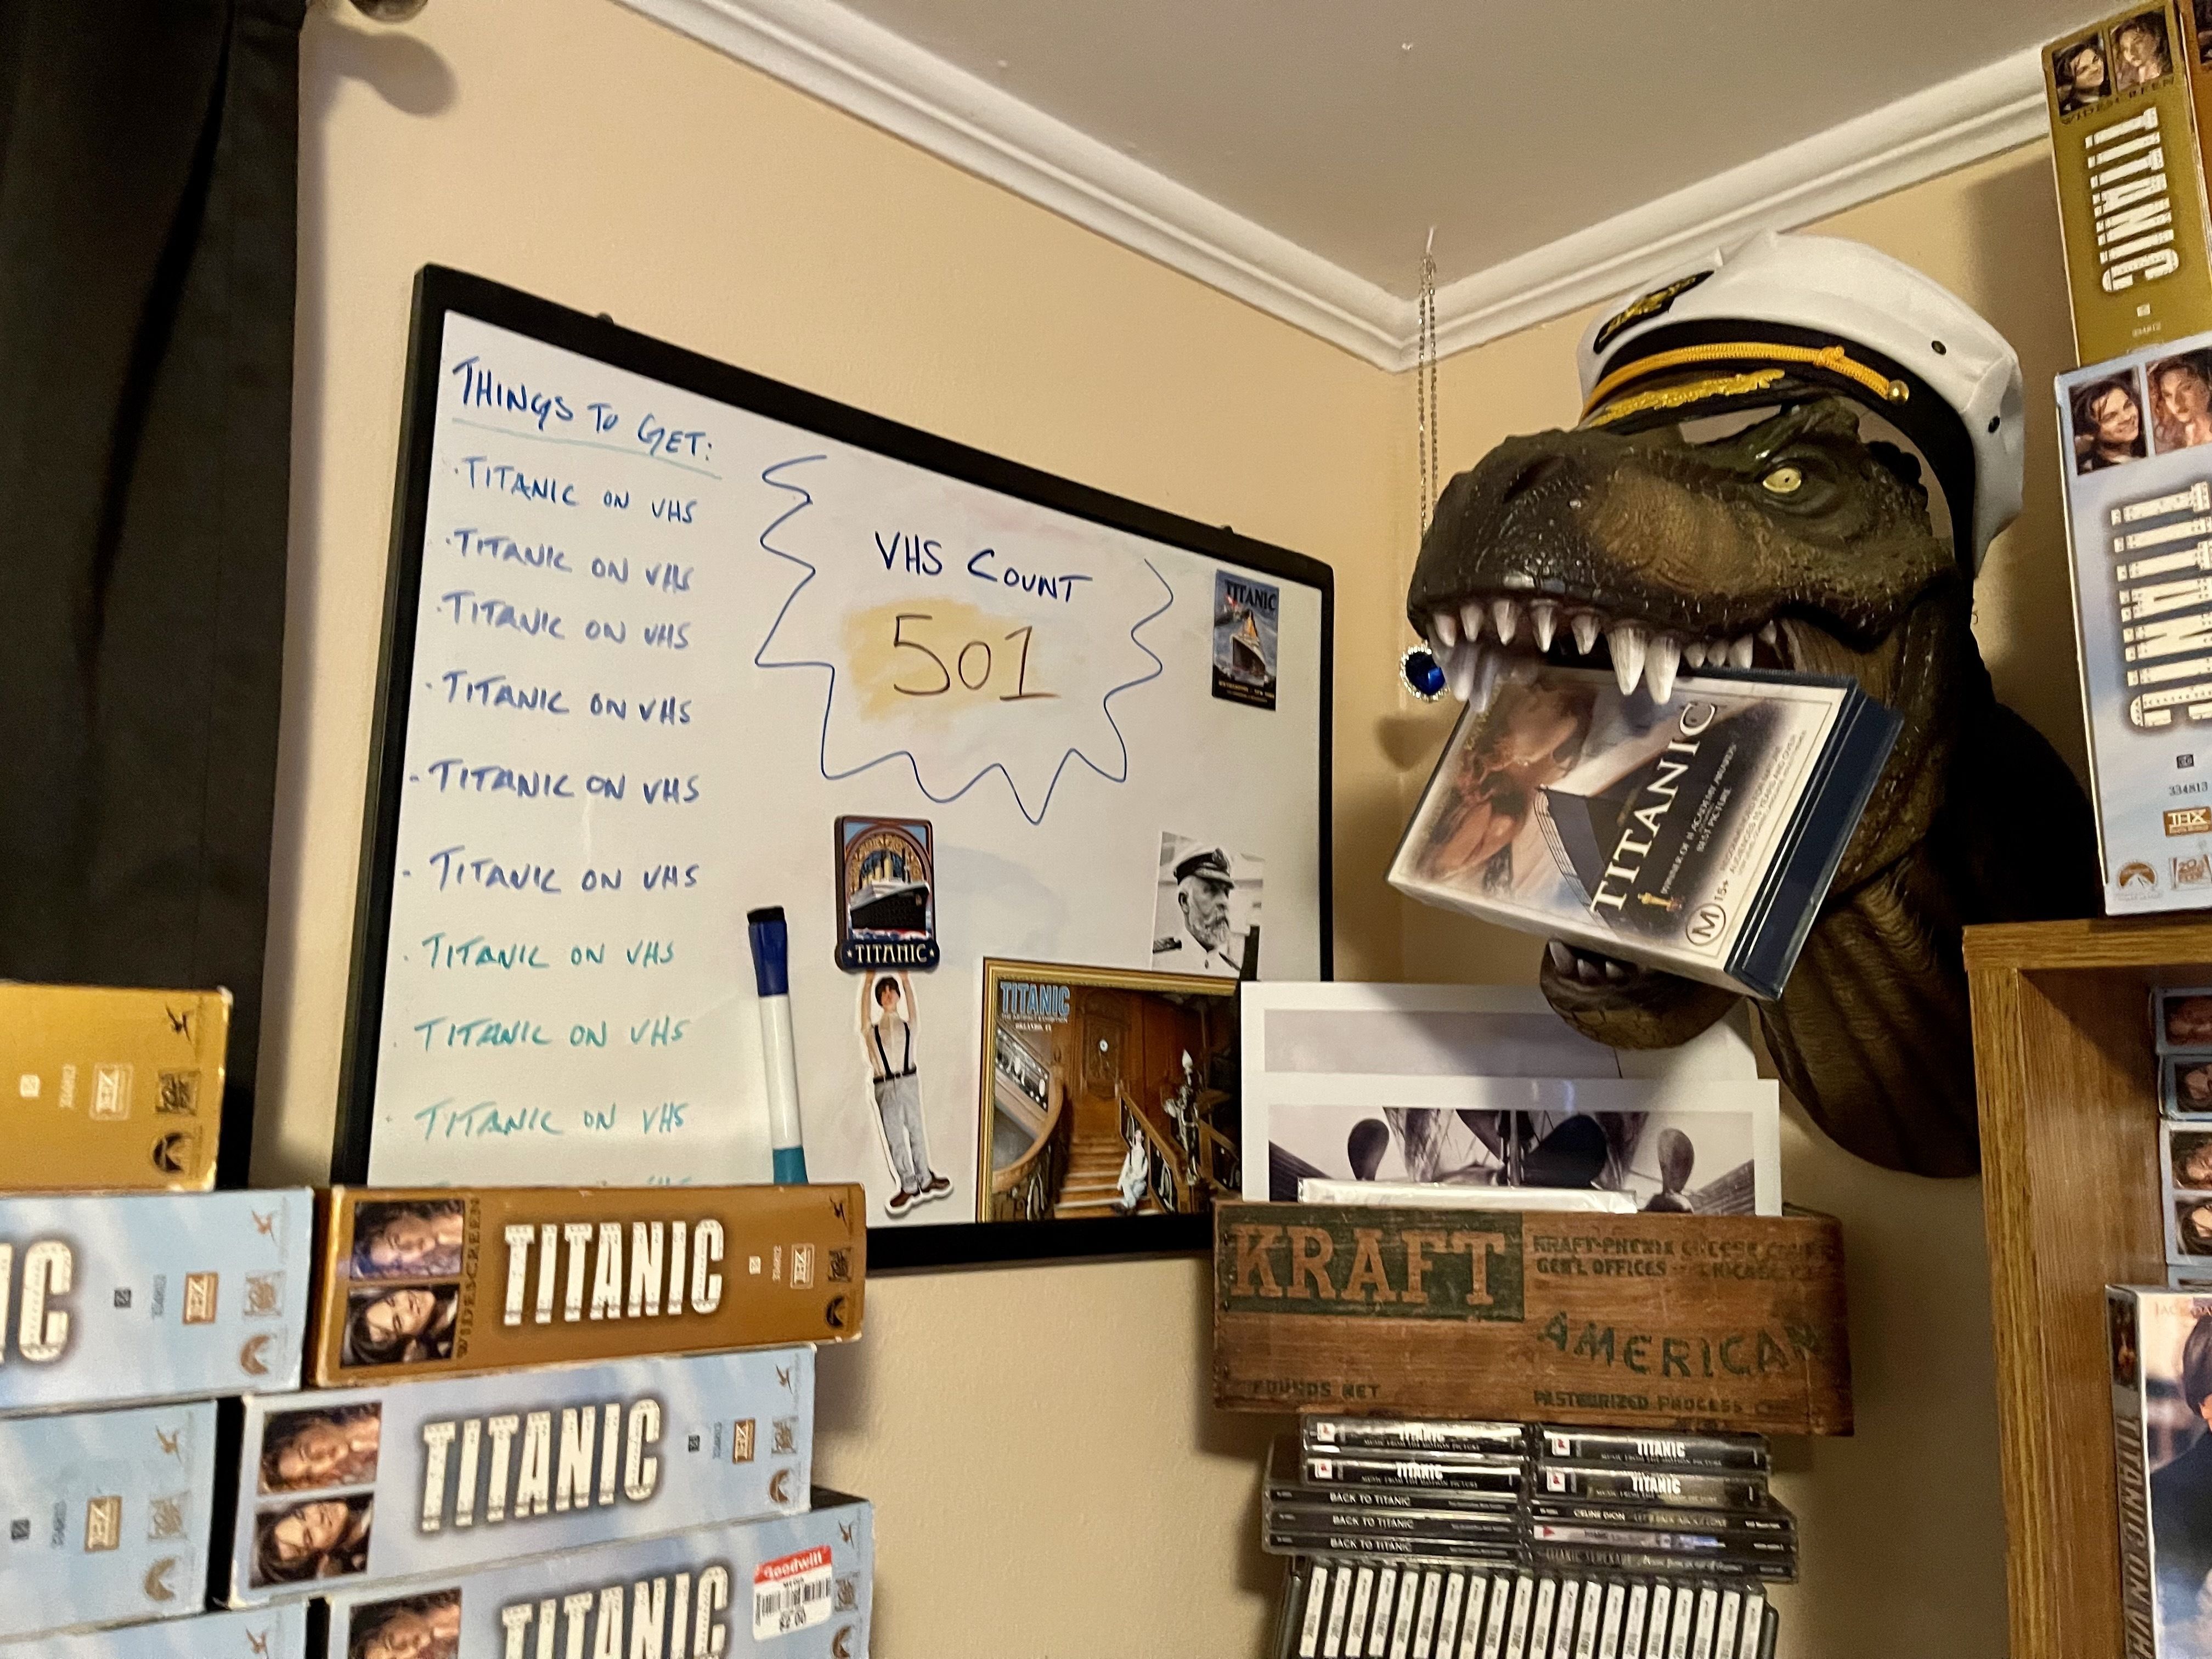 A whiteboard reading "Things to get:" with "Titanic on VHS" on the list nine times. and a VHS count reading 501